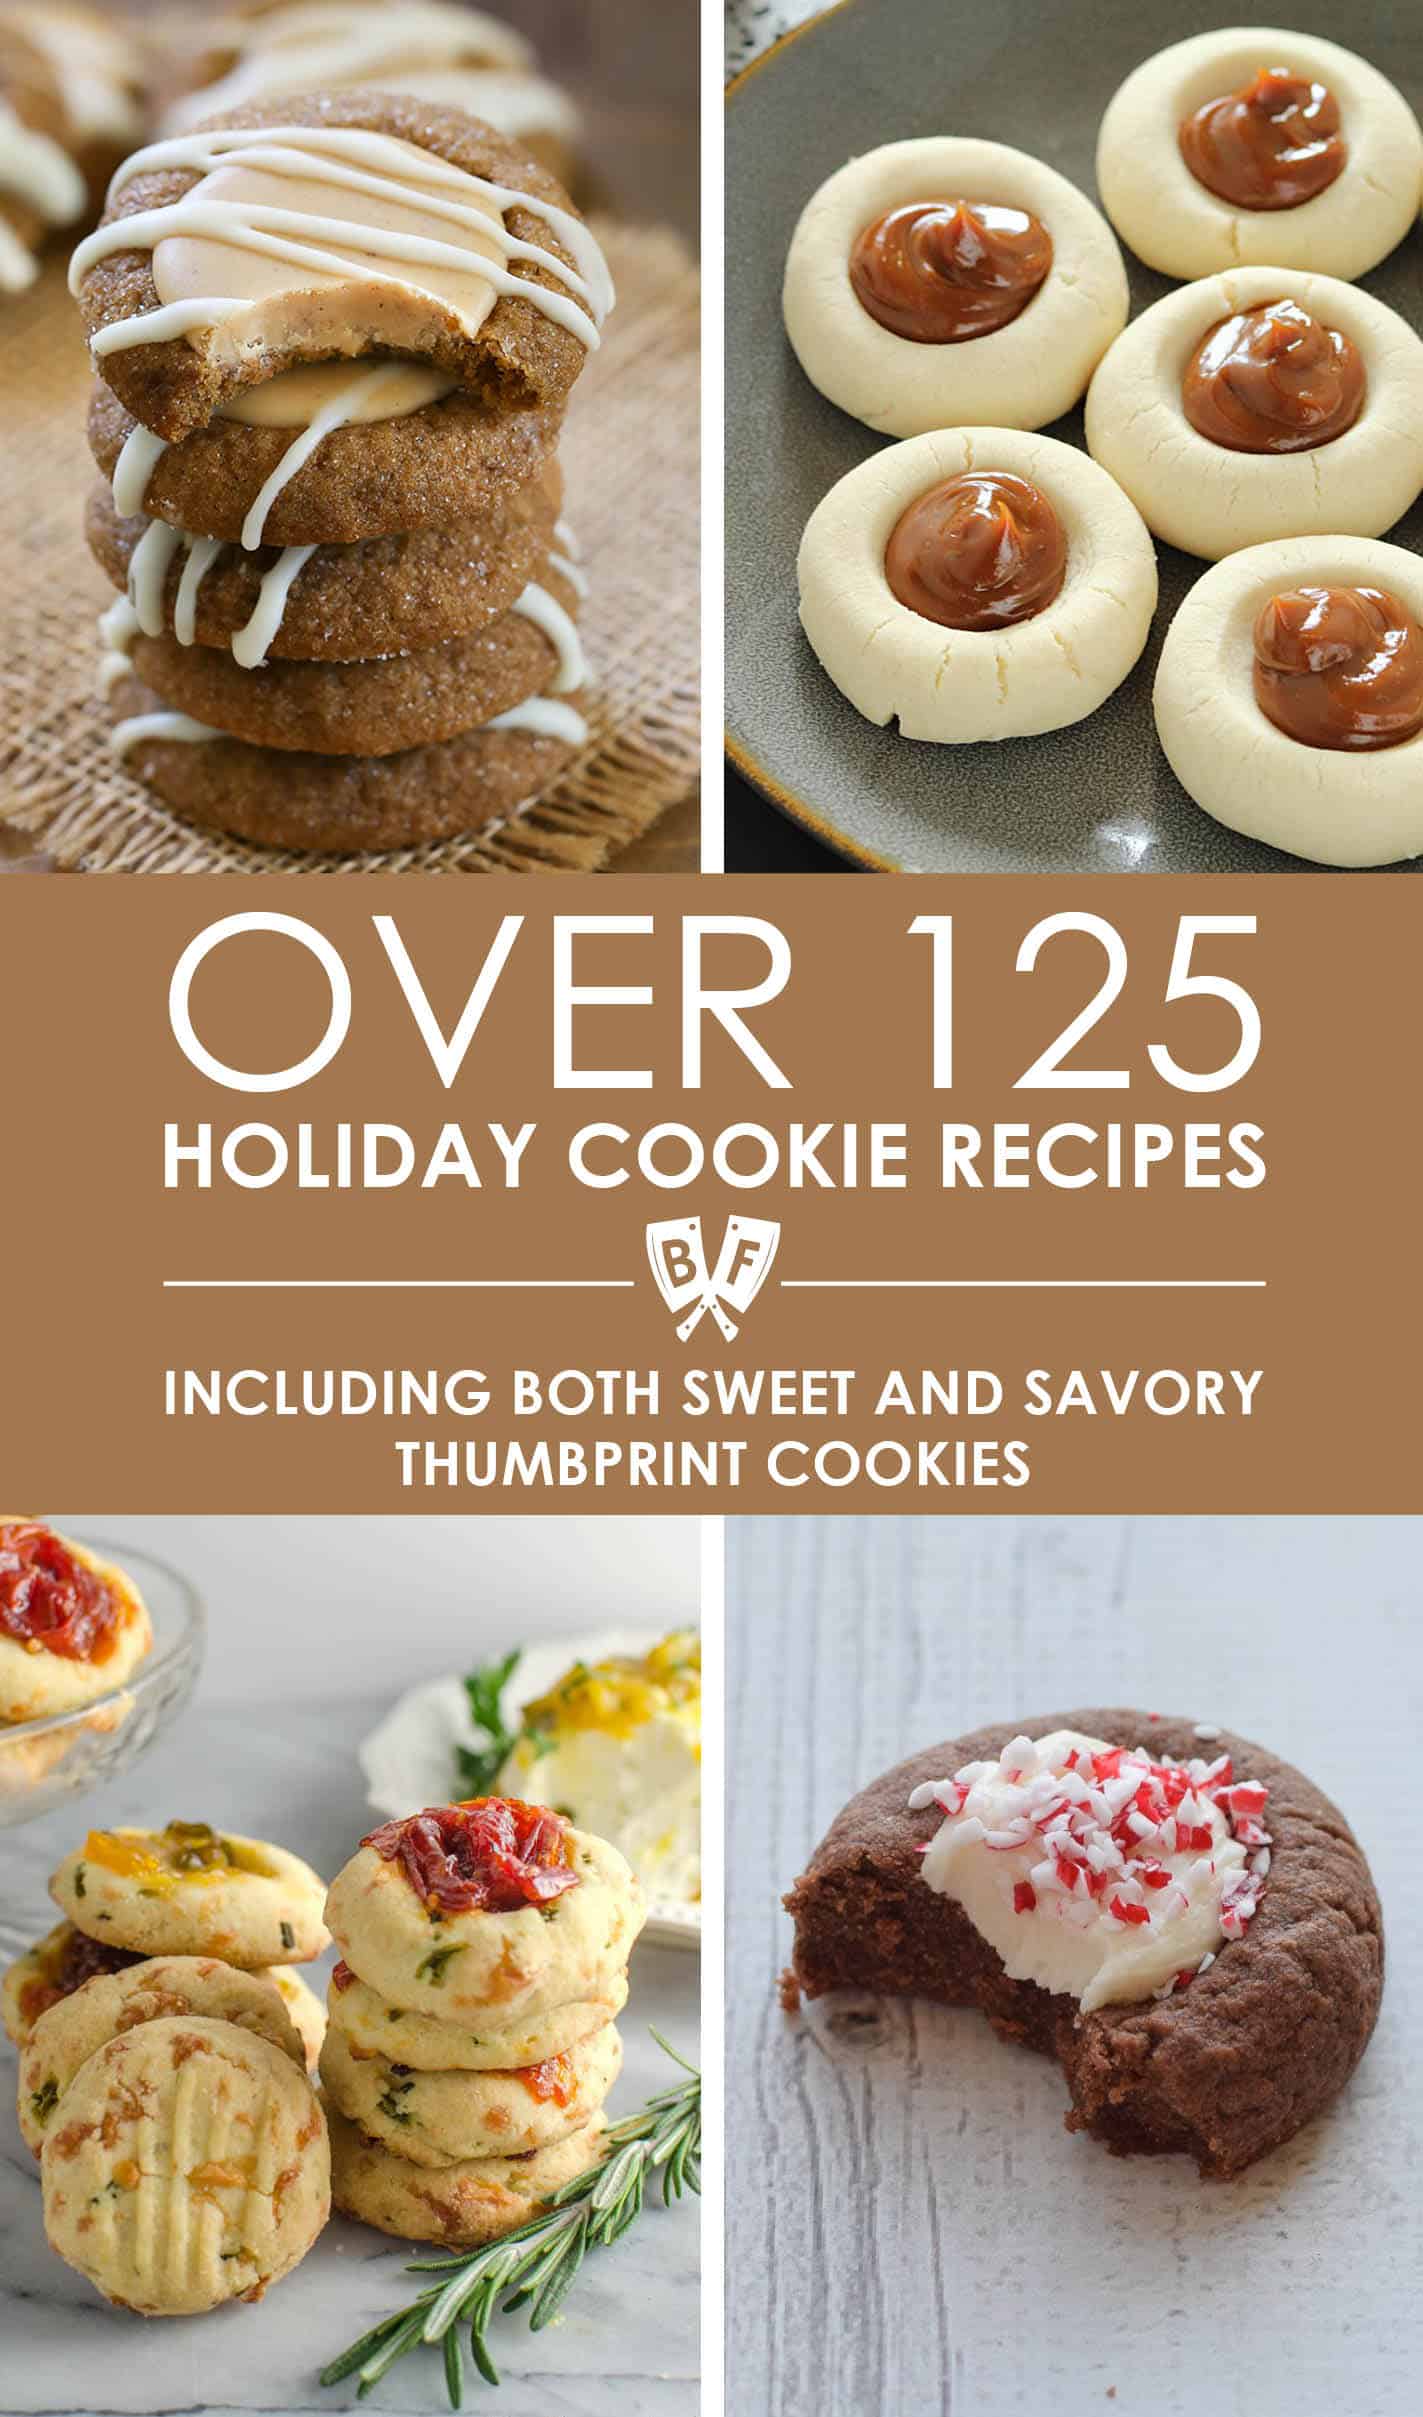 This epic holiday cookie recipe roundup contains over 125 favorite Christmas and holiday cookie recipes across 7 different categories to make your holiday baking and cookie swap parties so much easier!